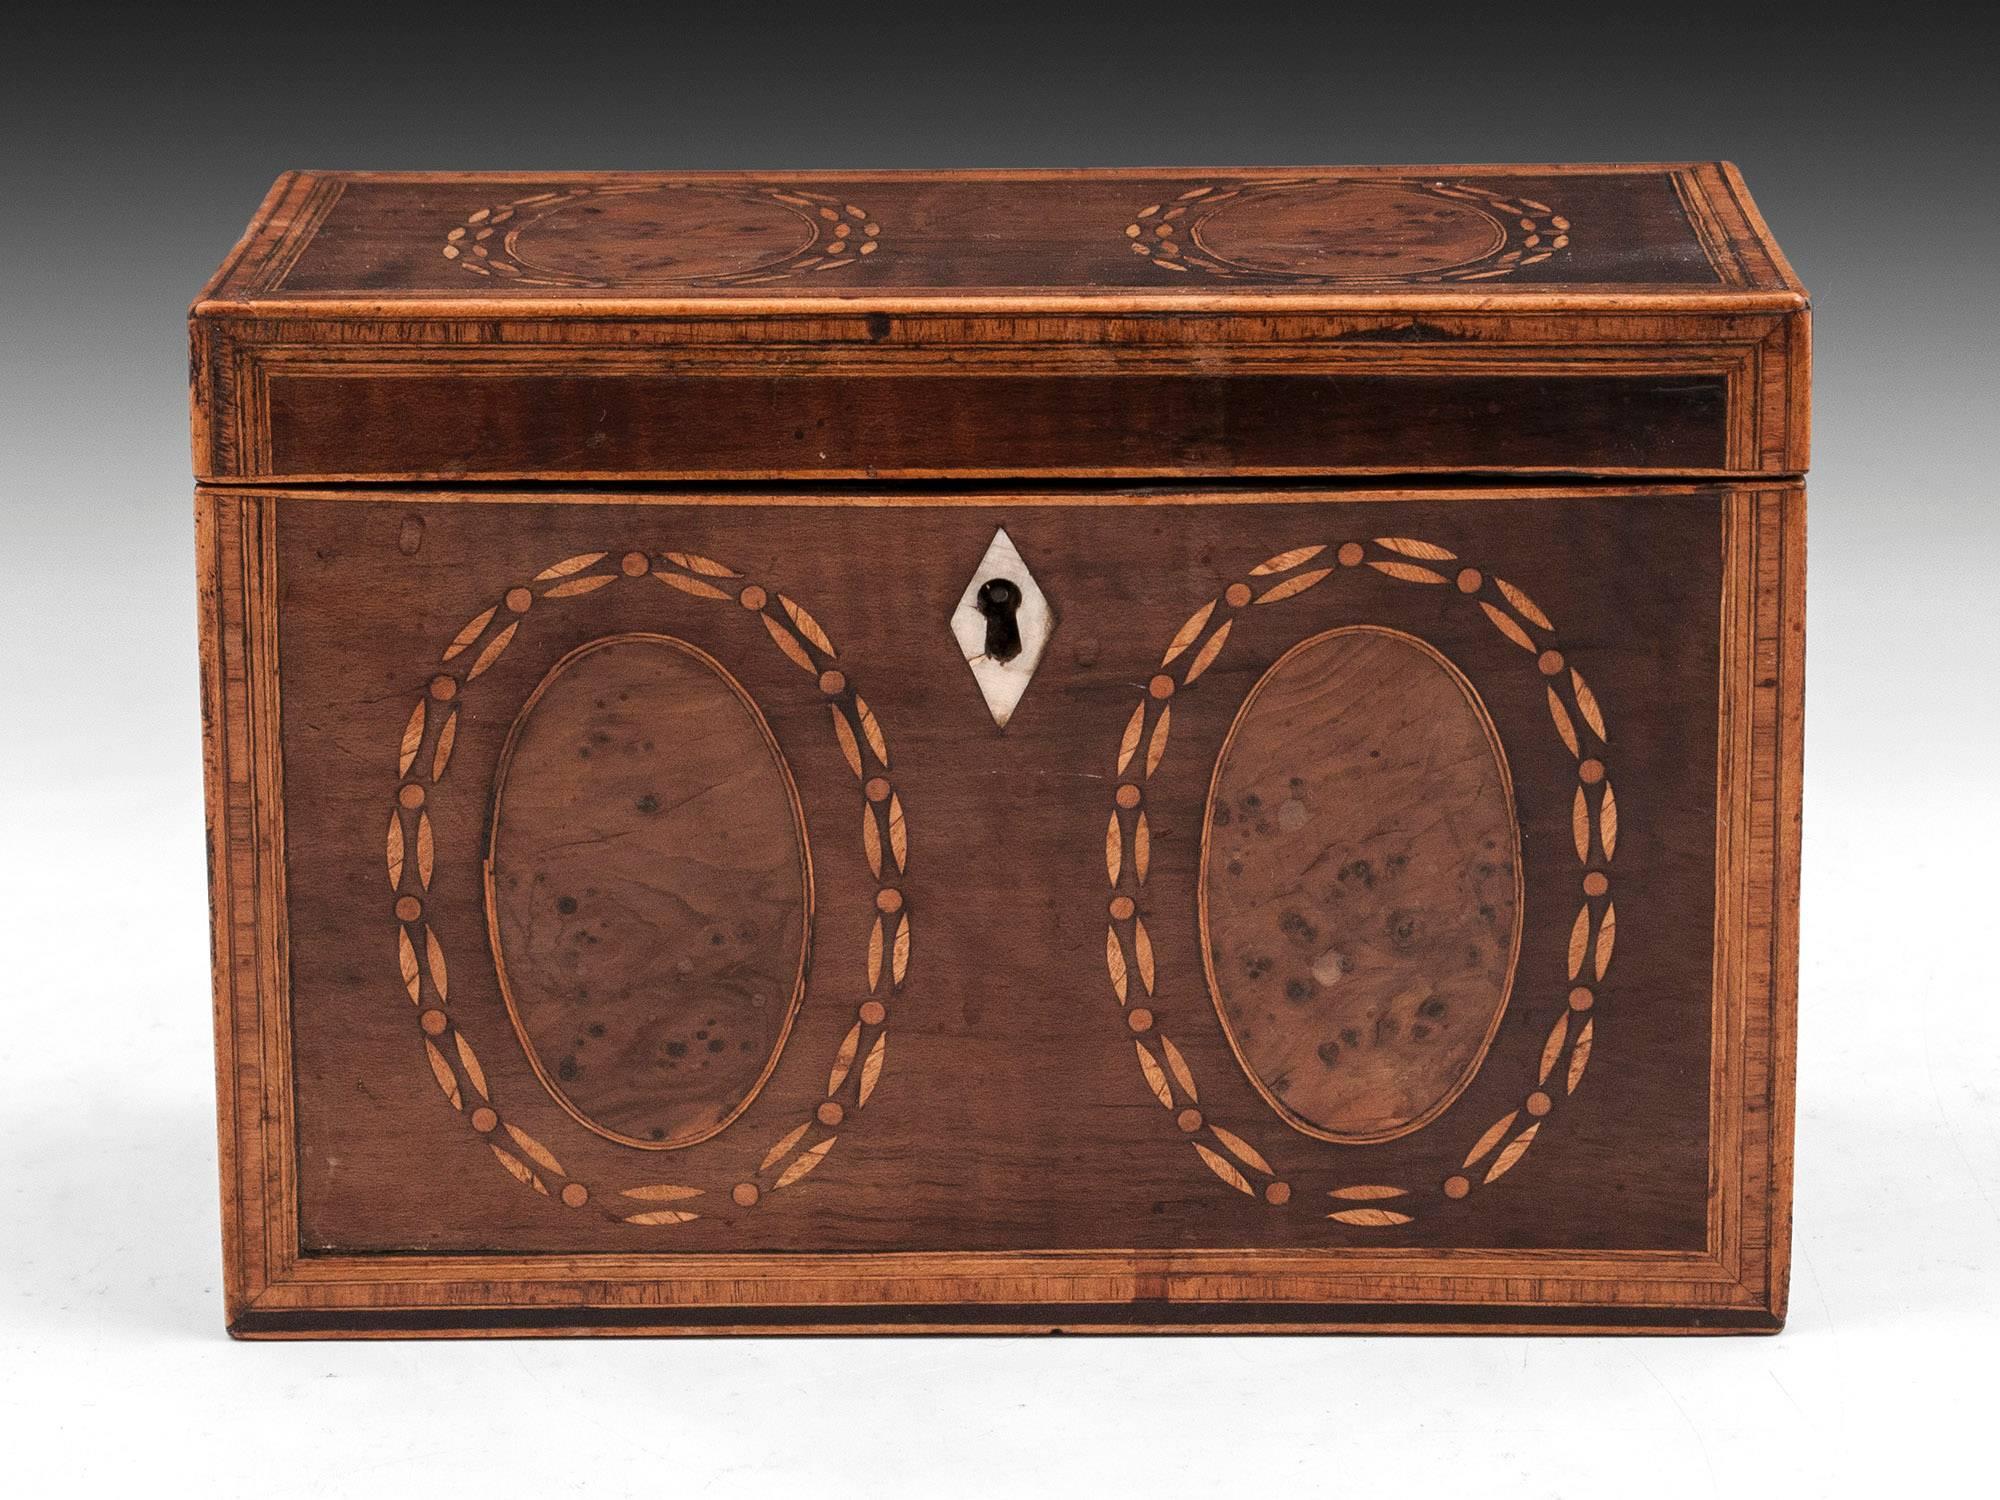 Antique tea caddy veneered in harewood with inlaid burr yew ovals and decorative inlays surrounding them, has bone escutcheon.

The interior of this Georgian tea caddy features two bone handled lidded compartments, comes with a key and working